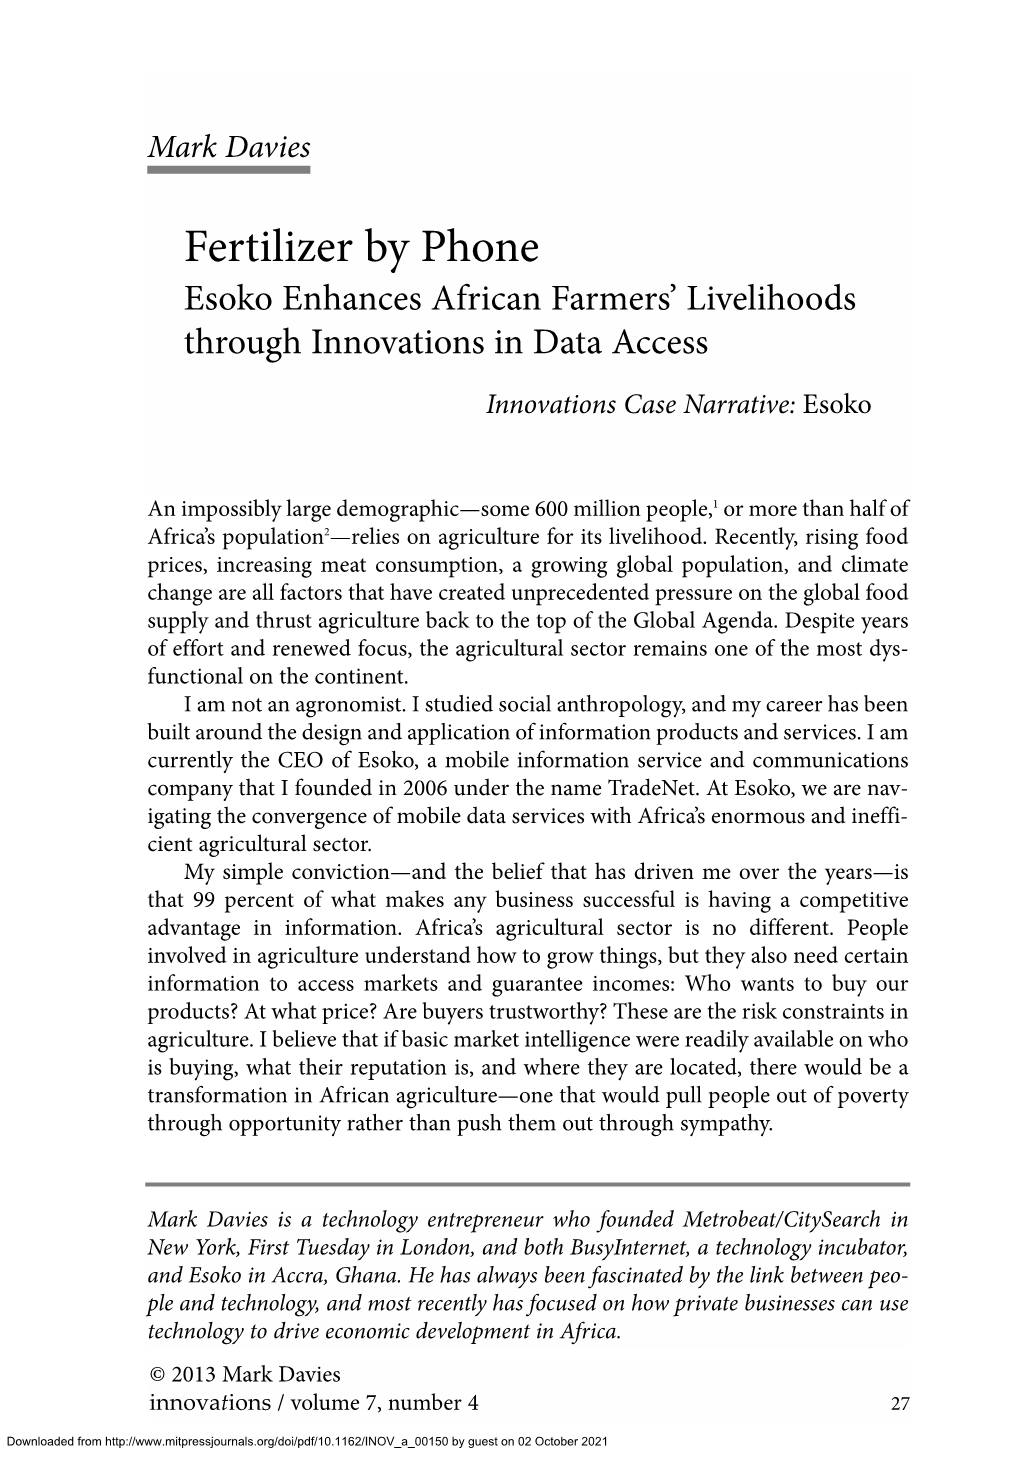 Fertilizer by Phone Esoko Enhances African Farmers’ Livelihoods Through Innovations in Data Access